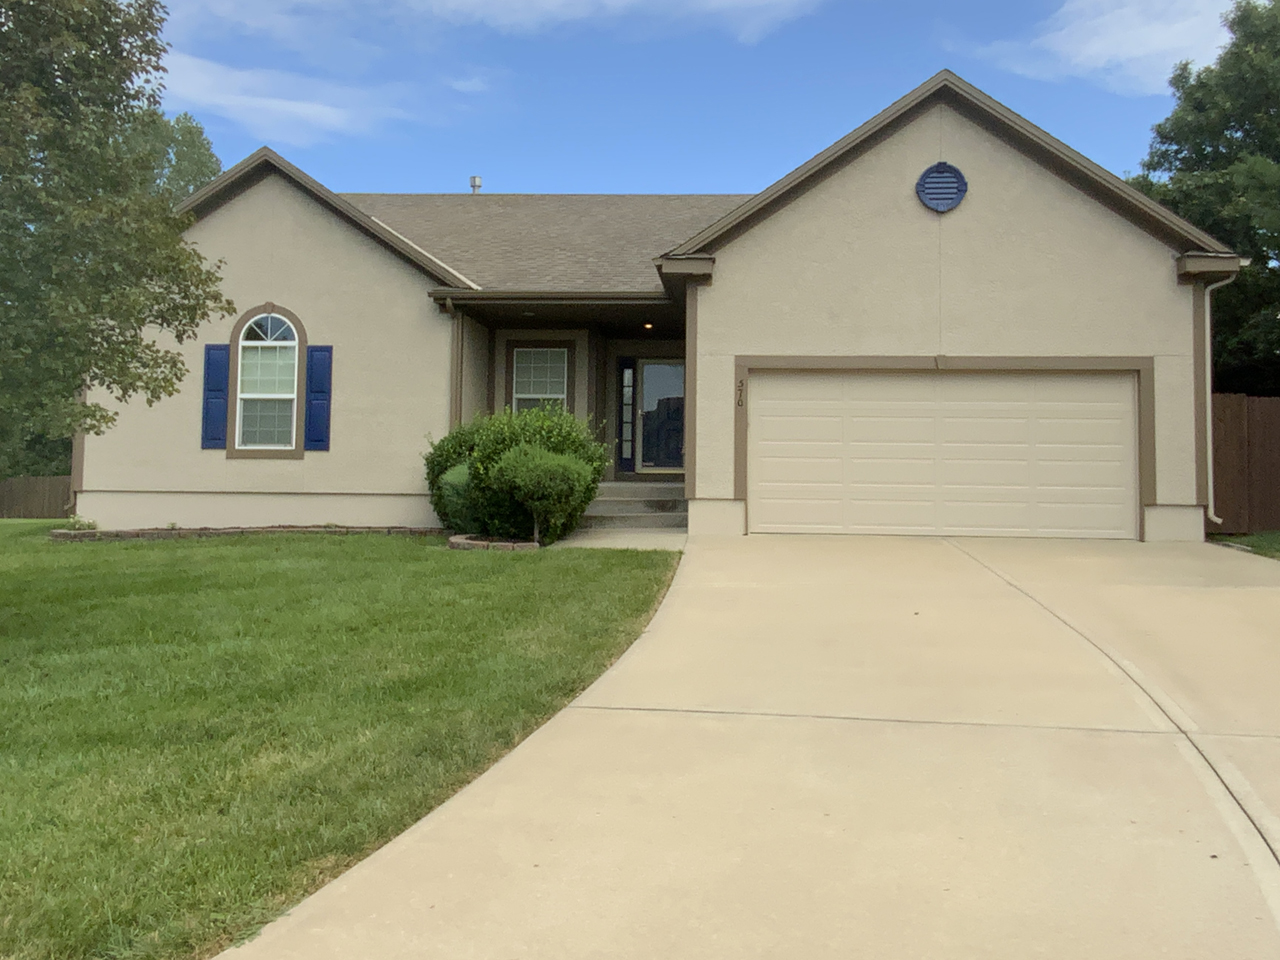 Lenexa, KS – Before & After Painting After